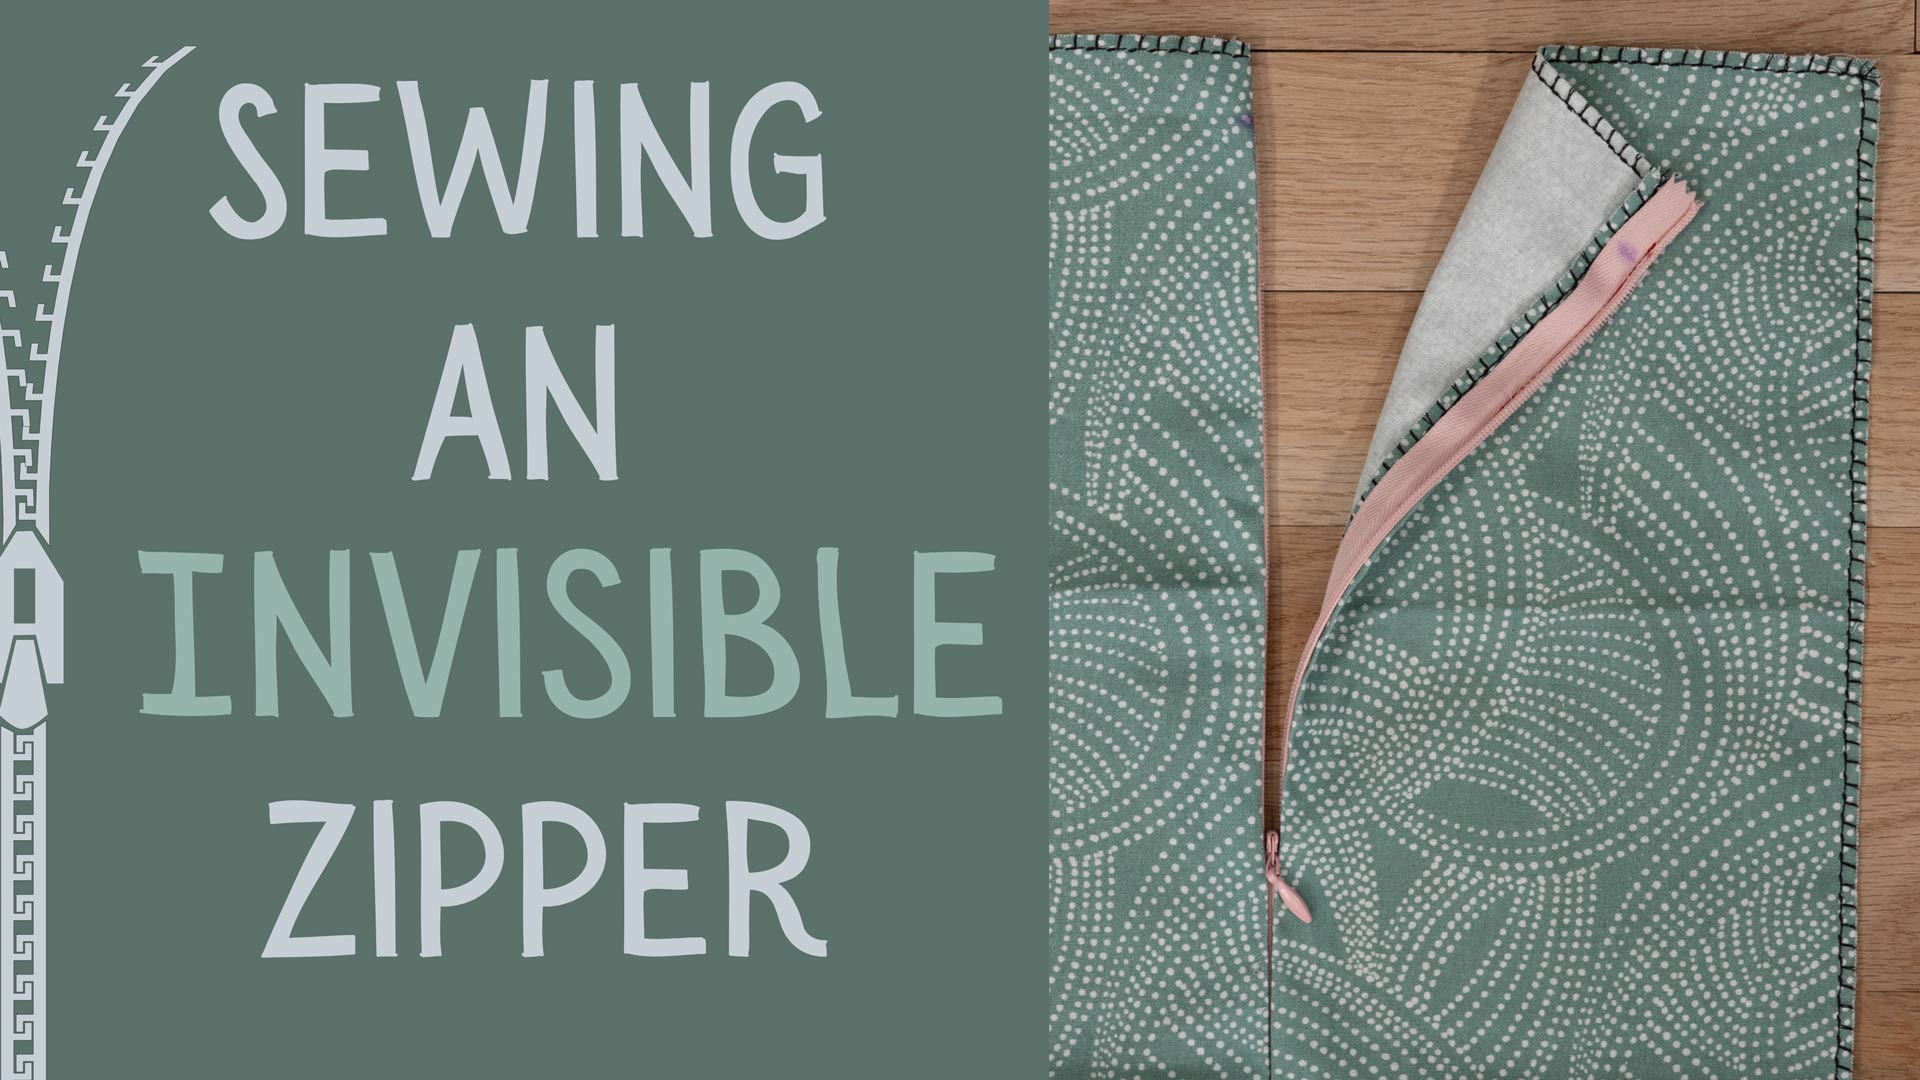 How to sew an invisible zip - The Sewing Directory